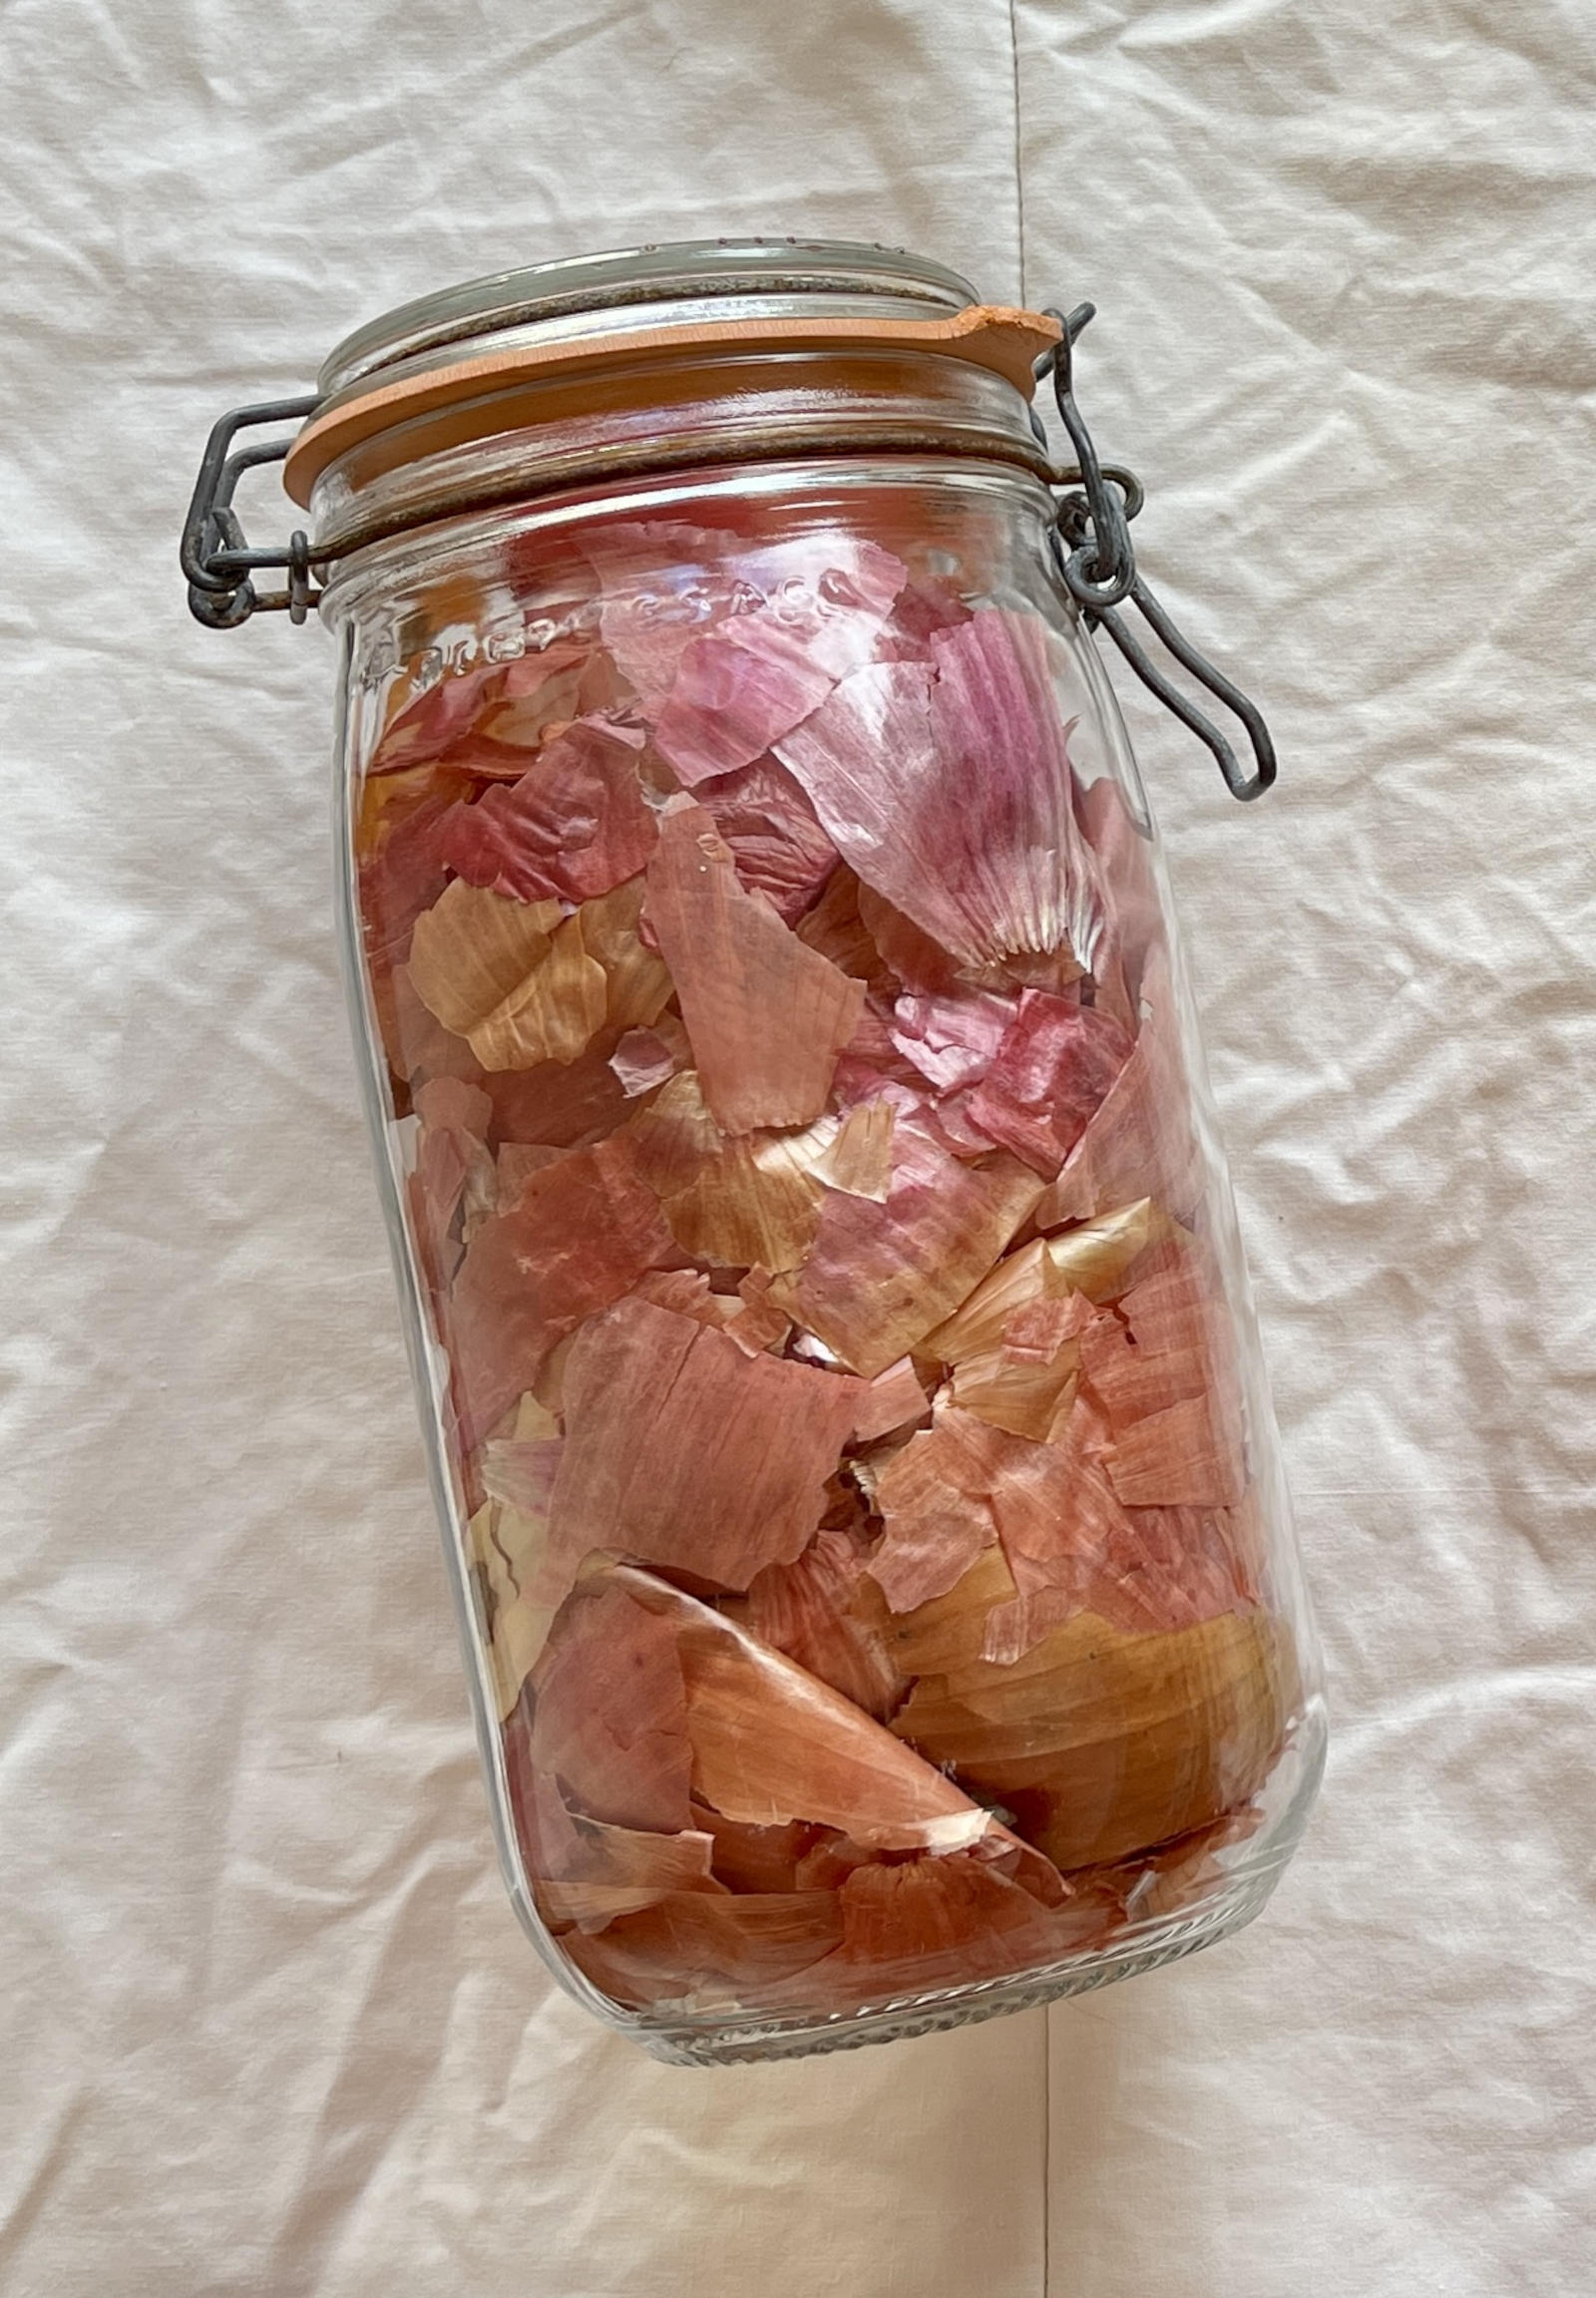 A bale-top jar filled with onion skins sits on wrinkled white fabric